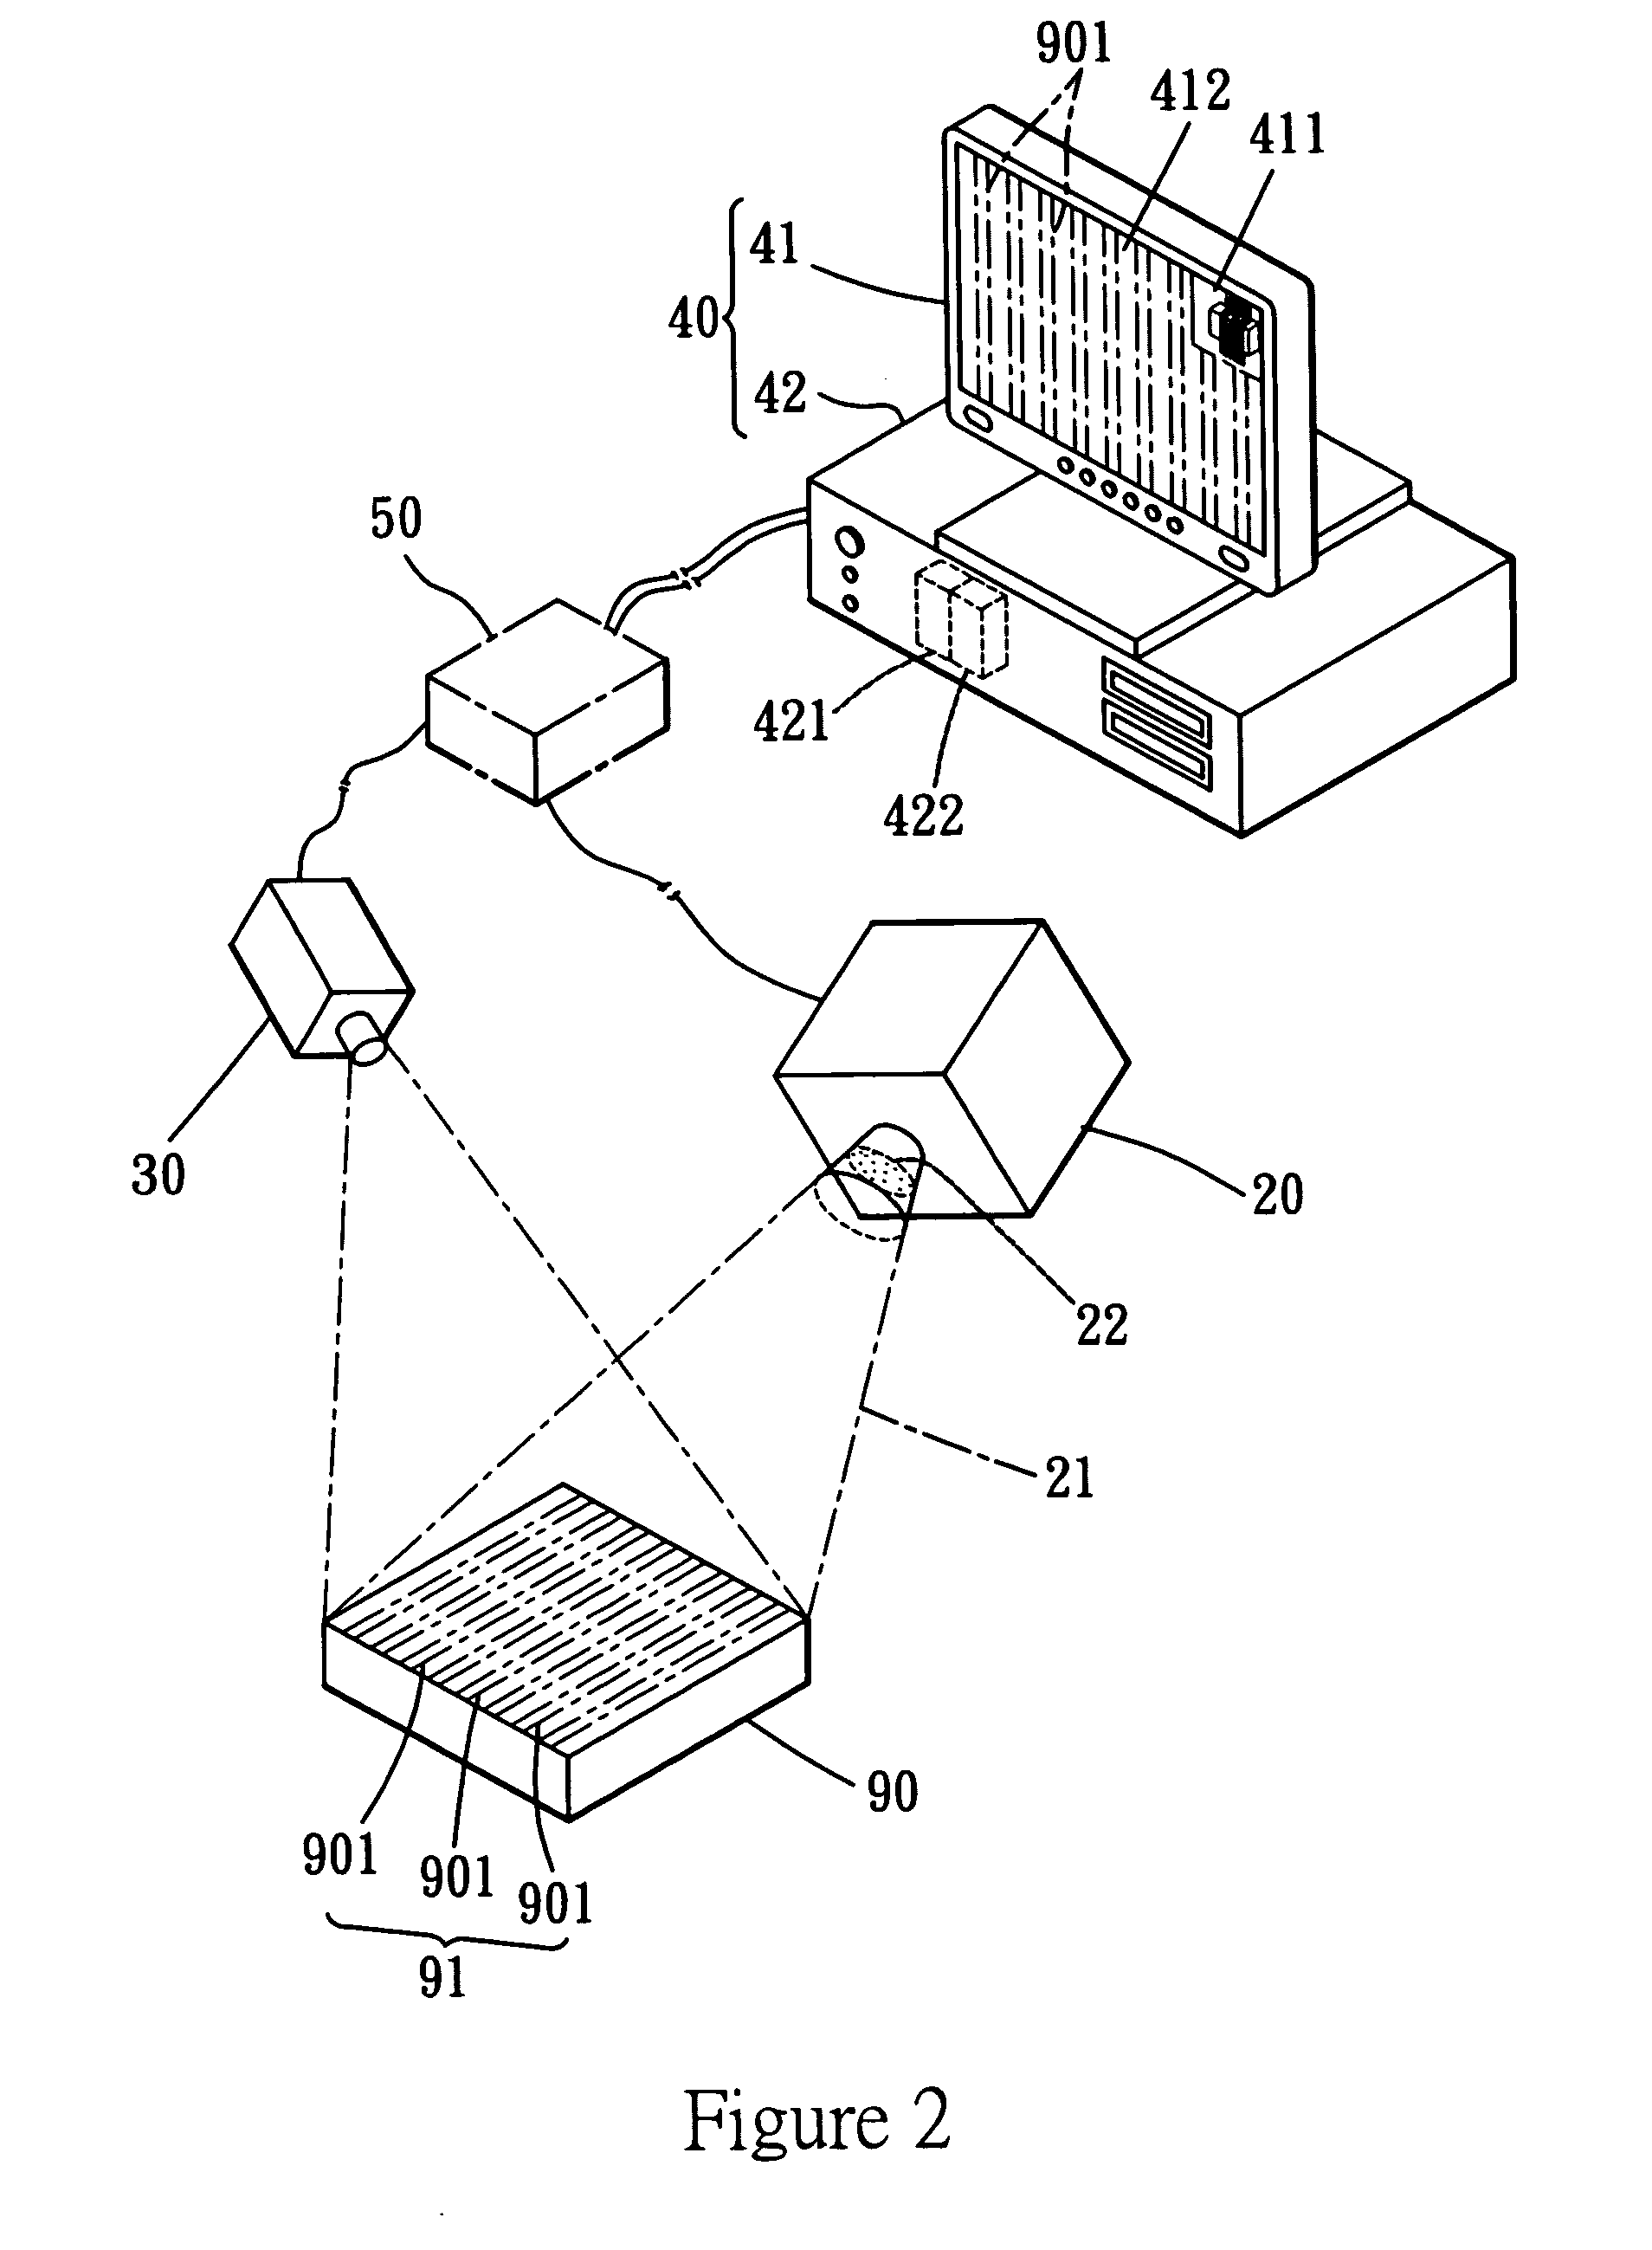 Measurement method of three-dimentional profiles and reconstruction system thereof using subpixel localization with color gratings and picture-in-picture switching on single display